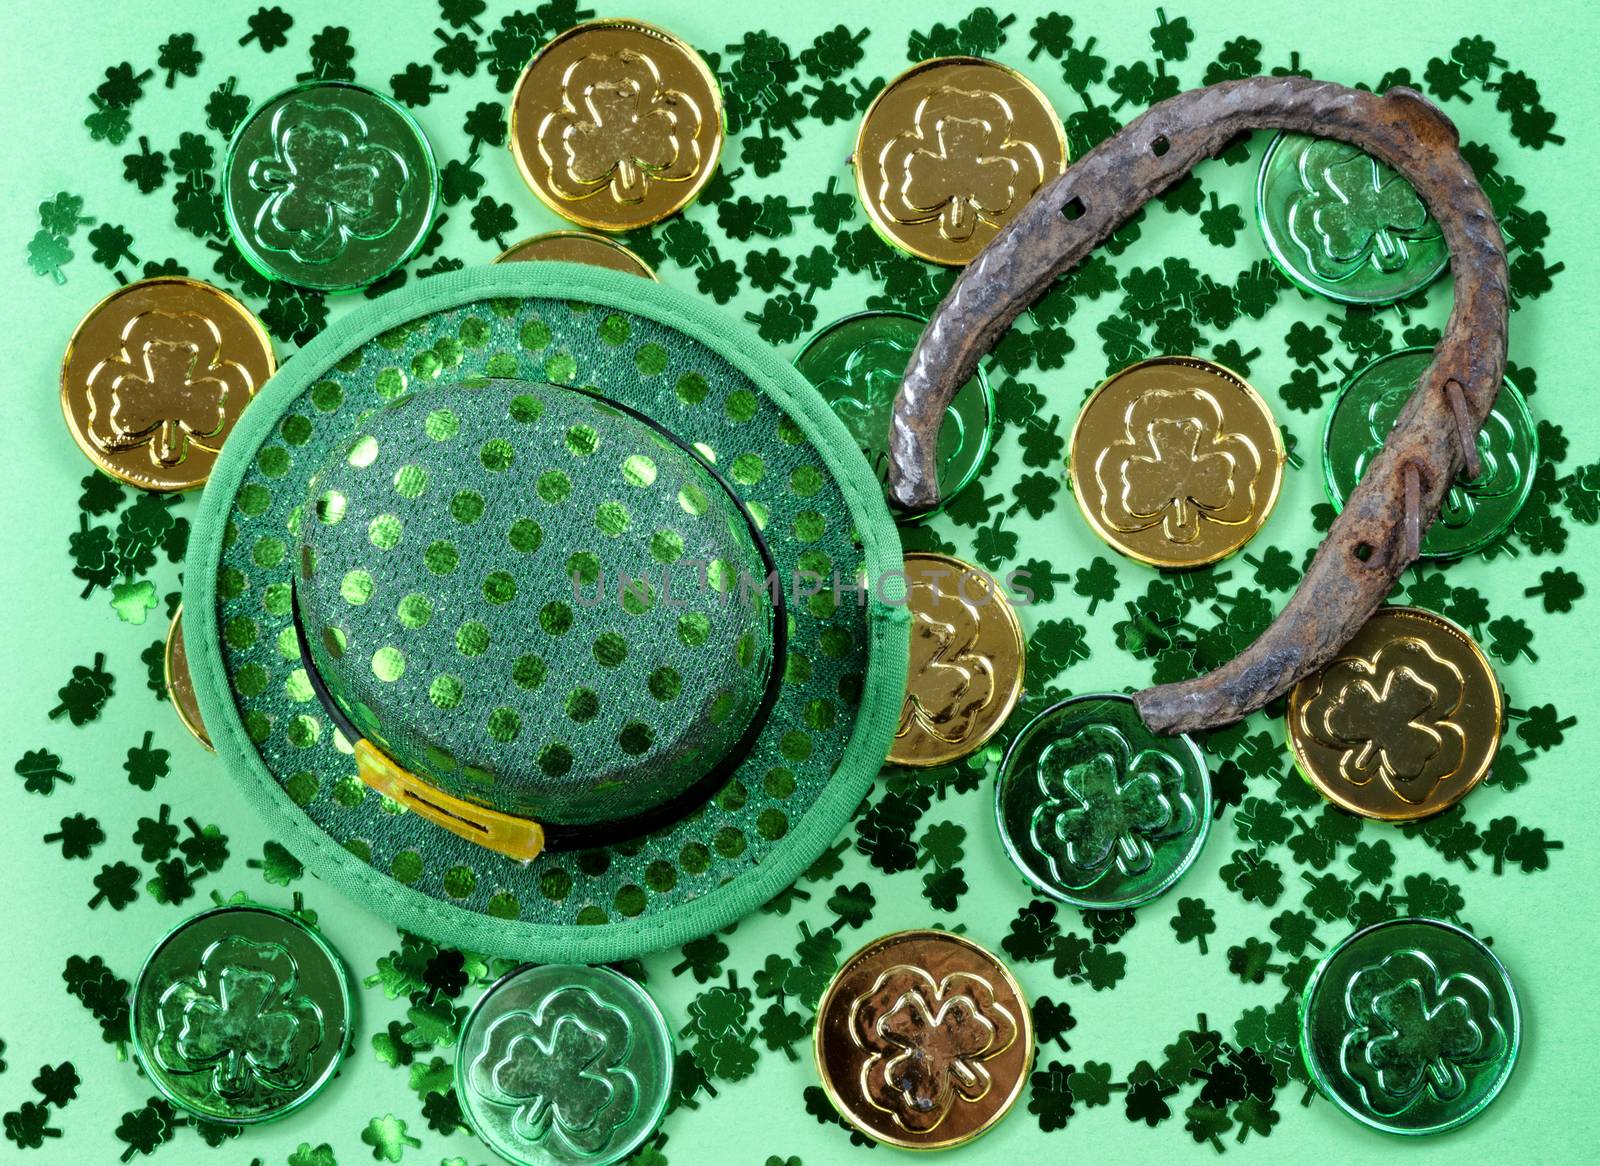 St Patricks Day with shamrocks and other Irish good luck items o by tab1962